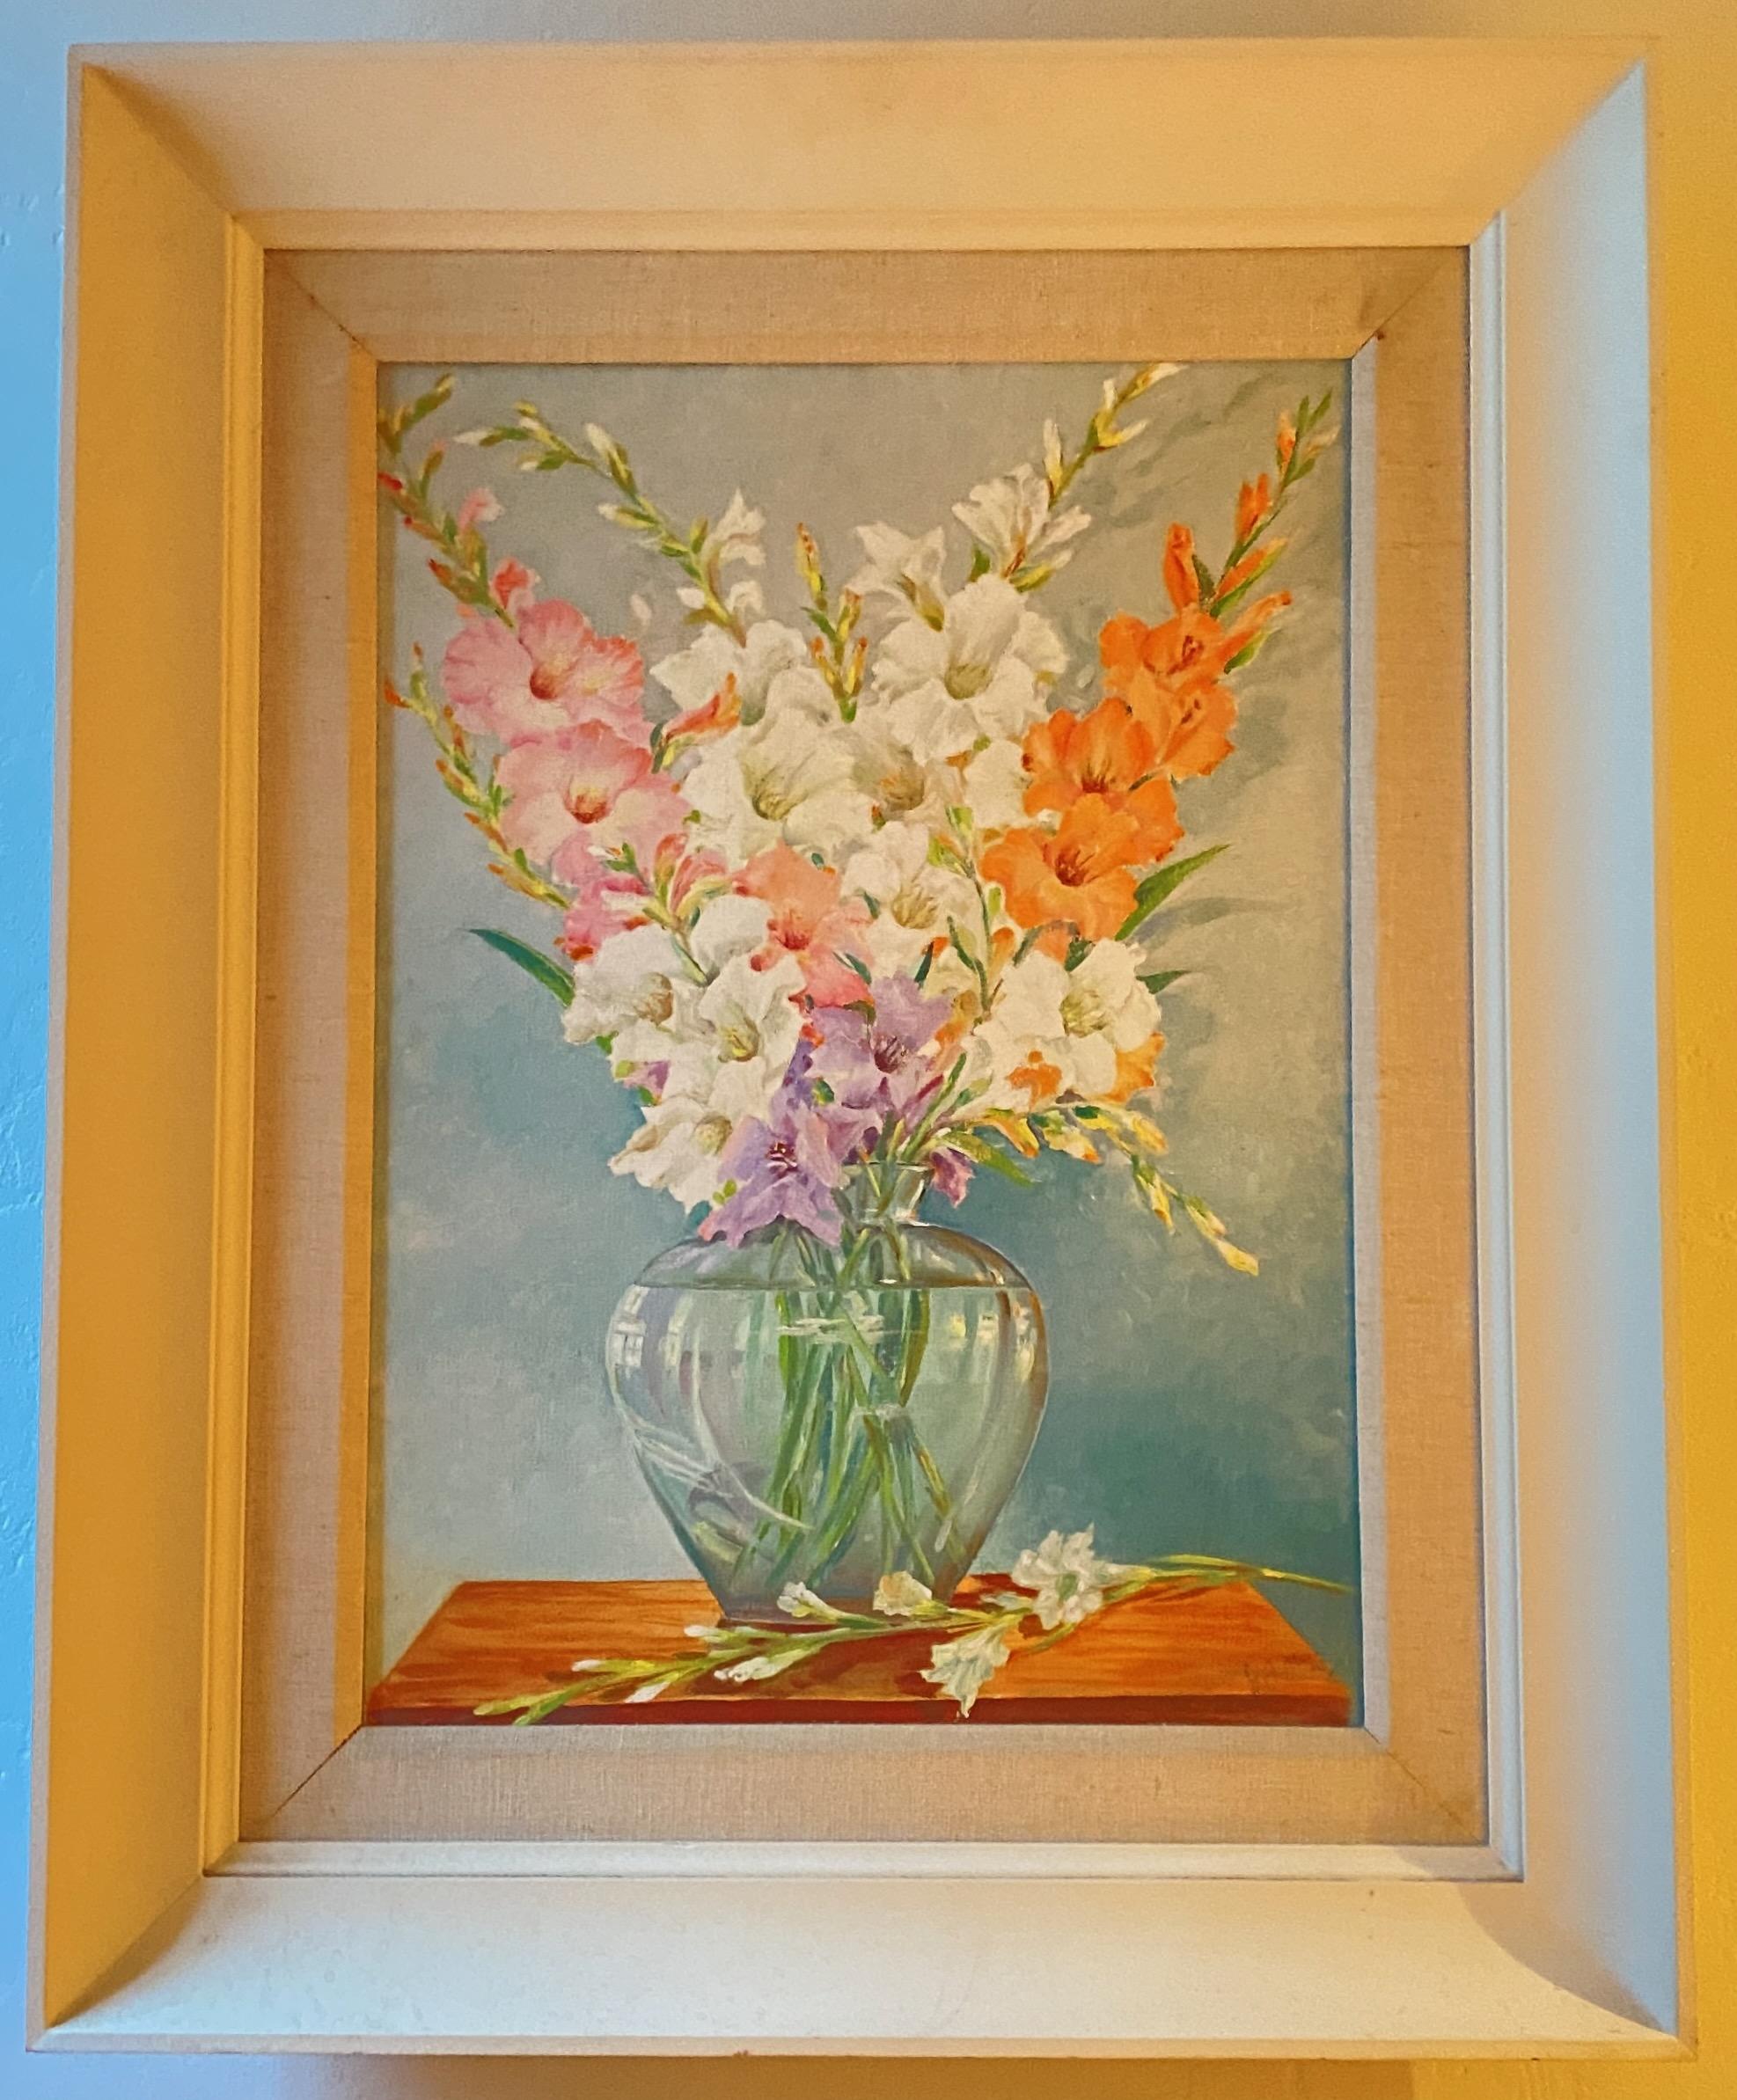 Beautifully painted still life of gladiolus signed J A McVey.
Oil on canvas in original period frame.
American mid 20th century.
   